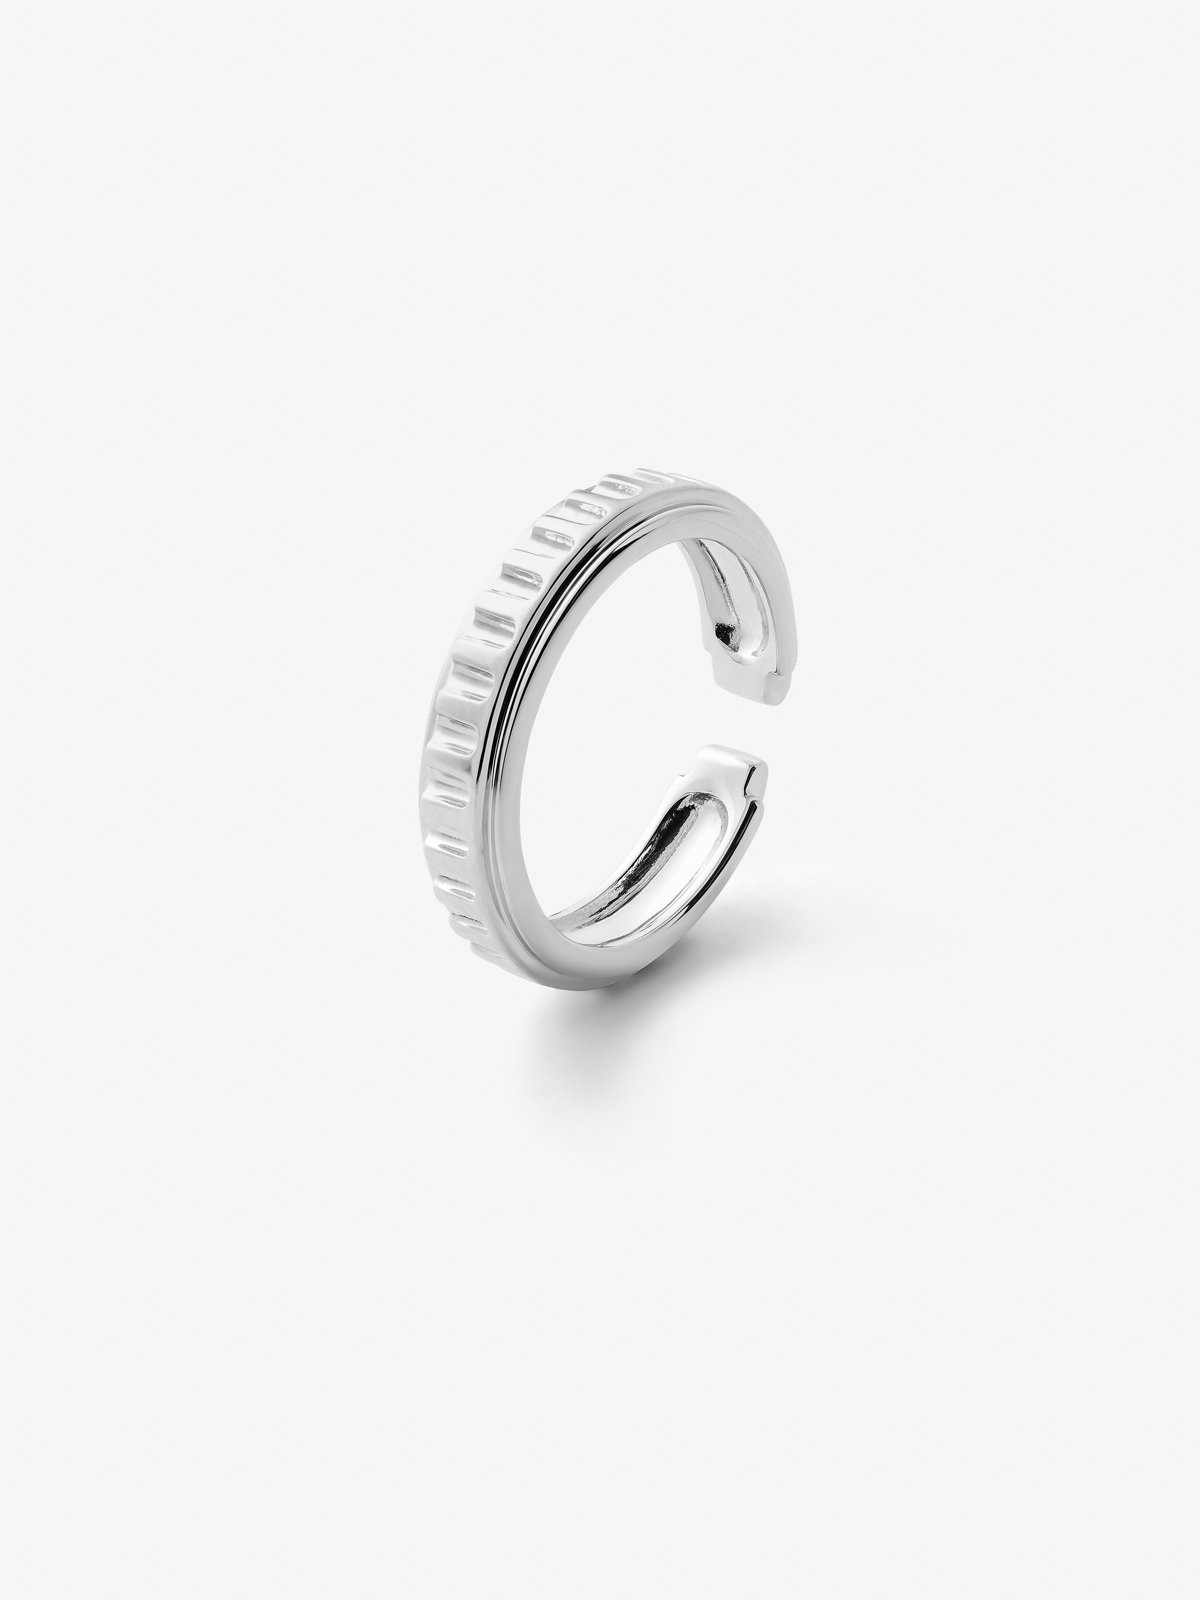 924 silver ring